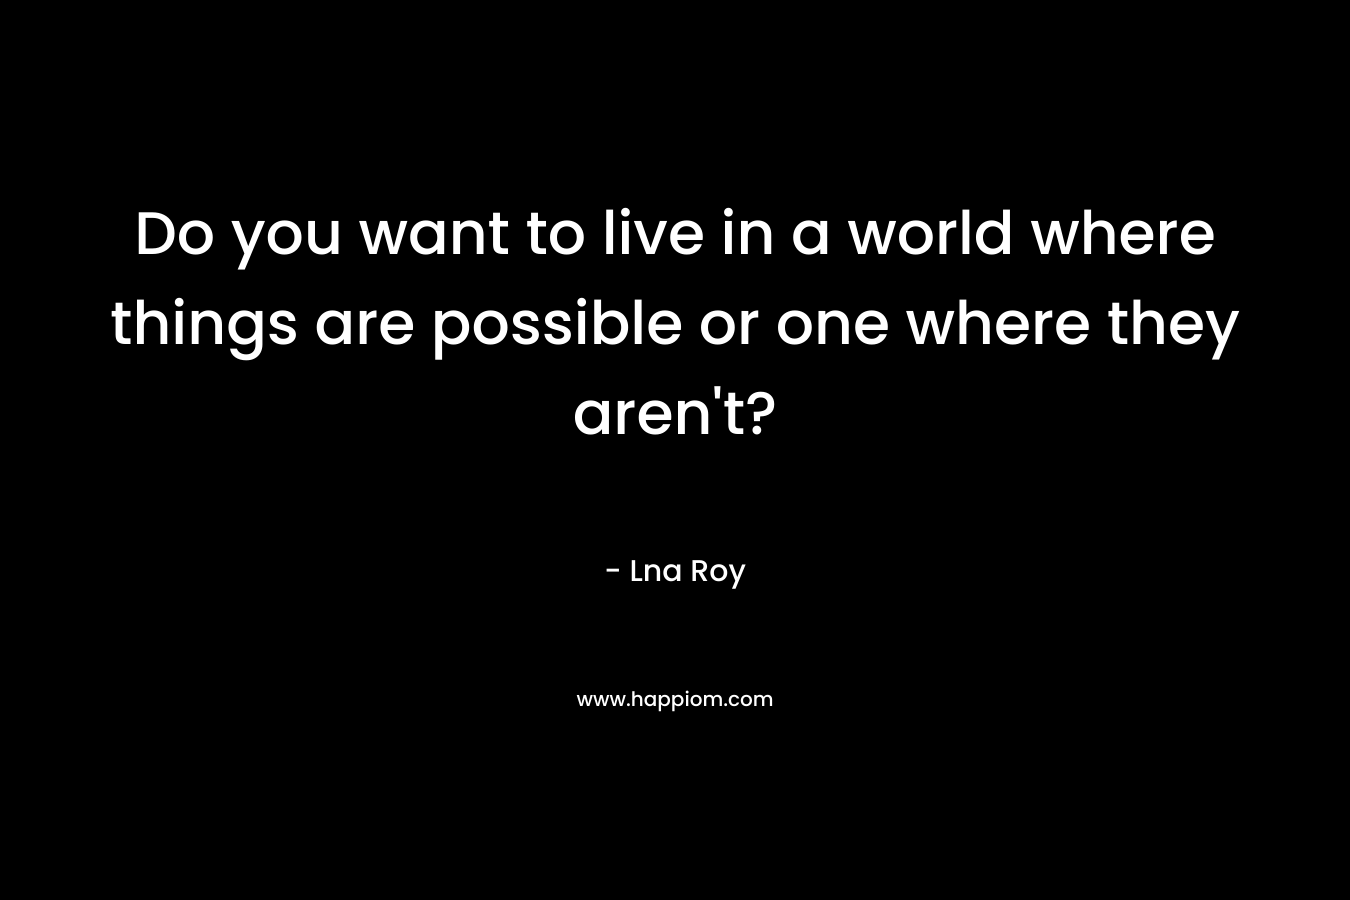 Do you want to live in a world where things are possible or one where they aren't?